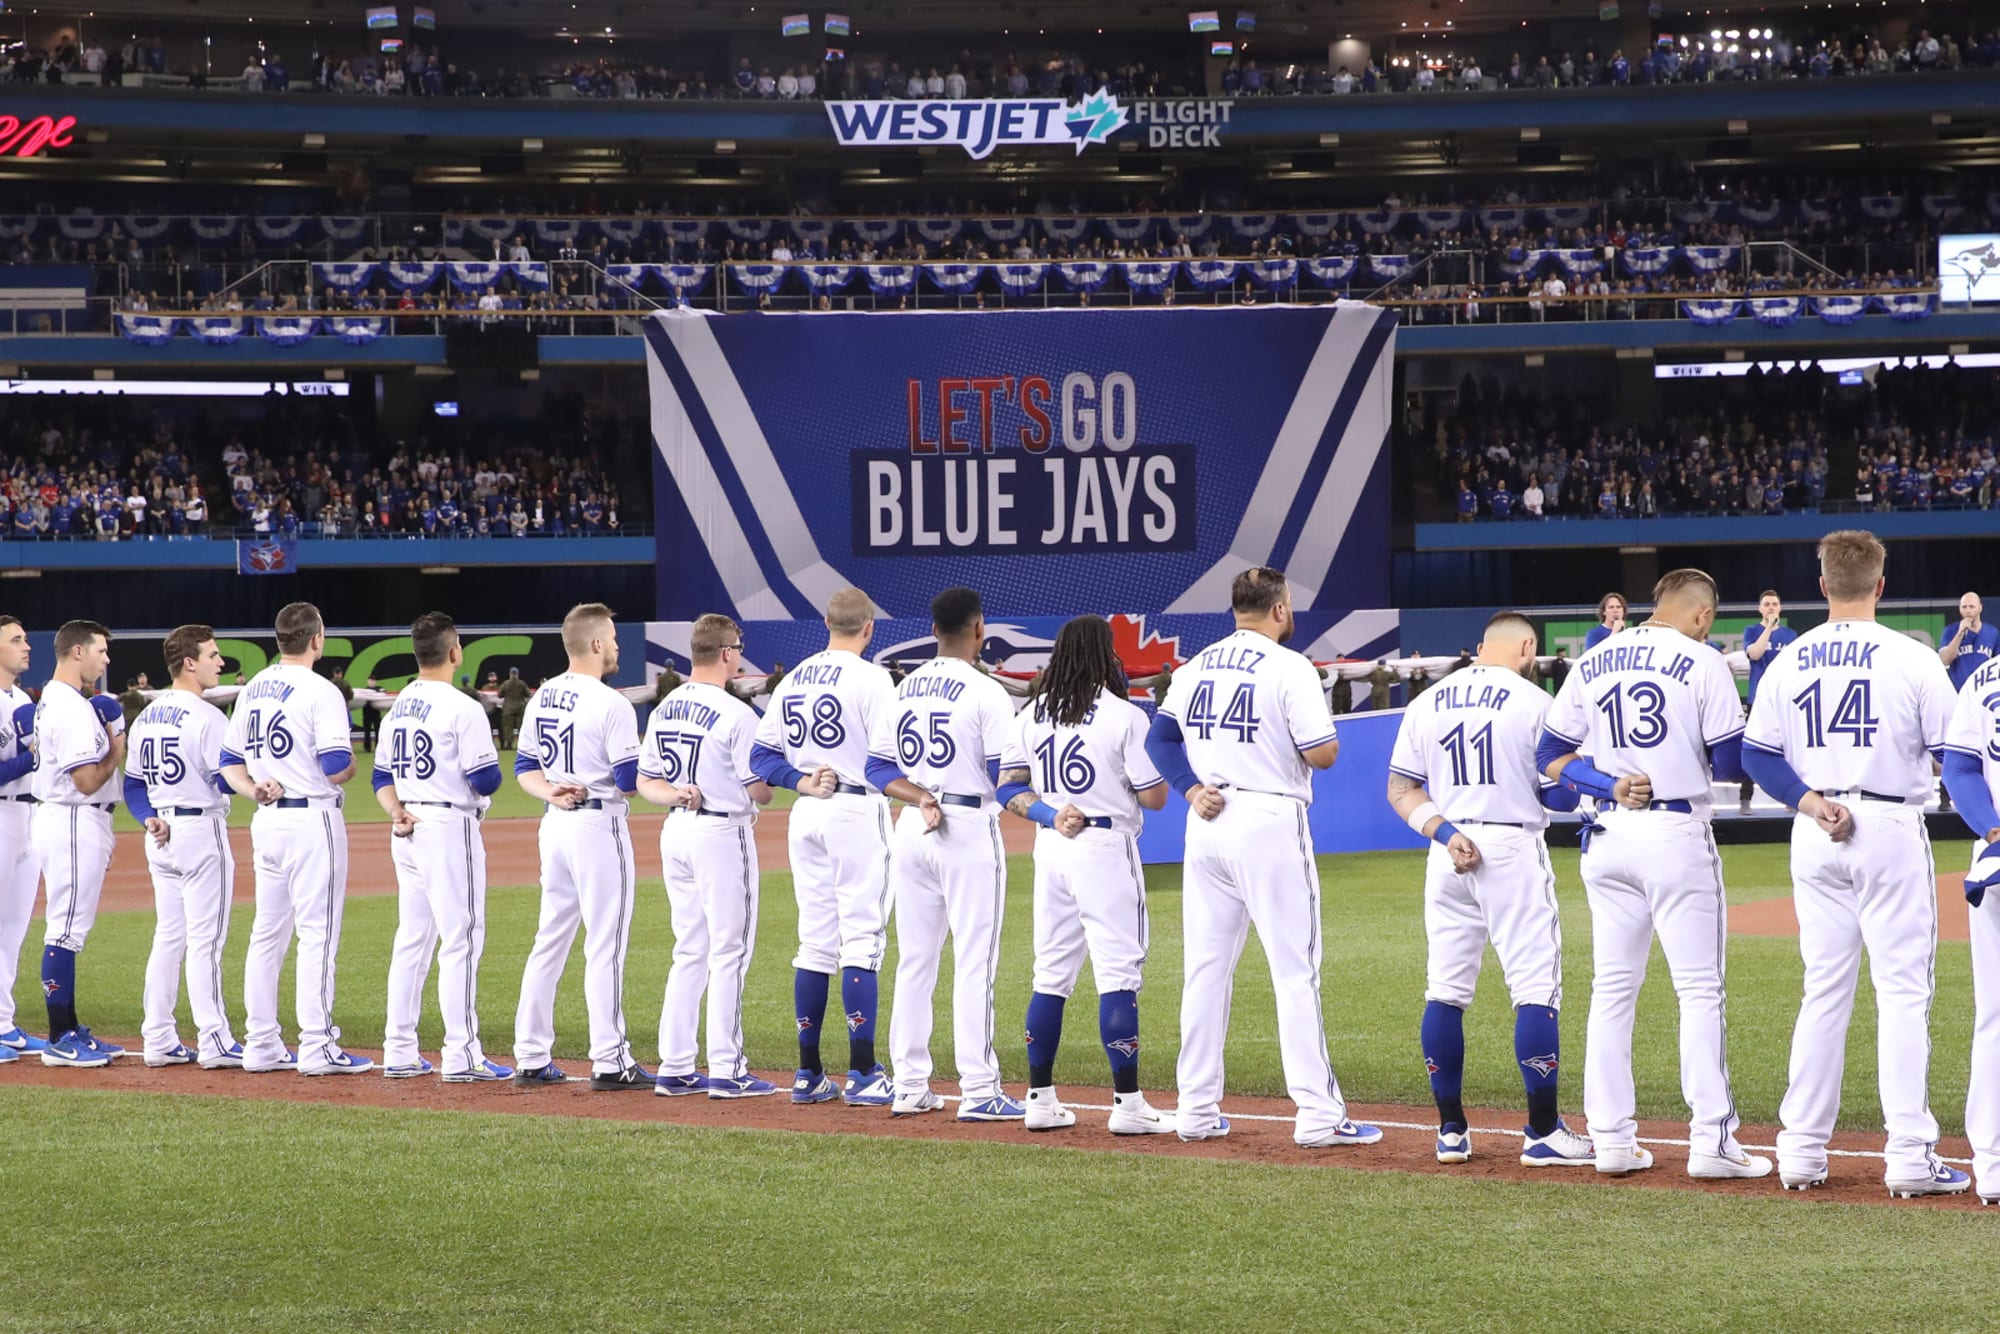 Toronto Blue Jays: 5 takeaways from the release of 2021 schedule